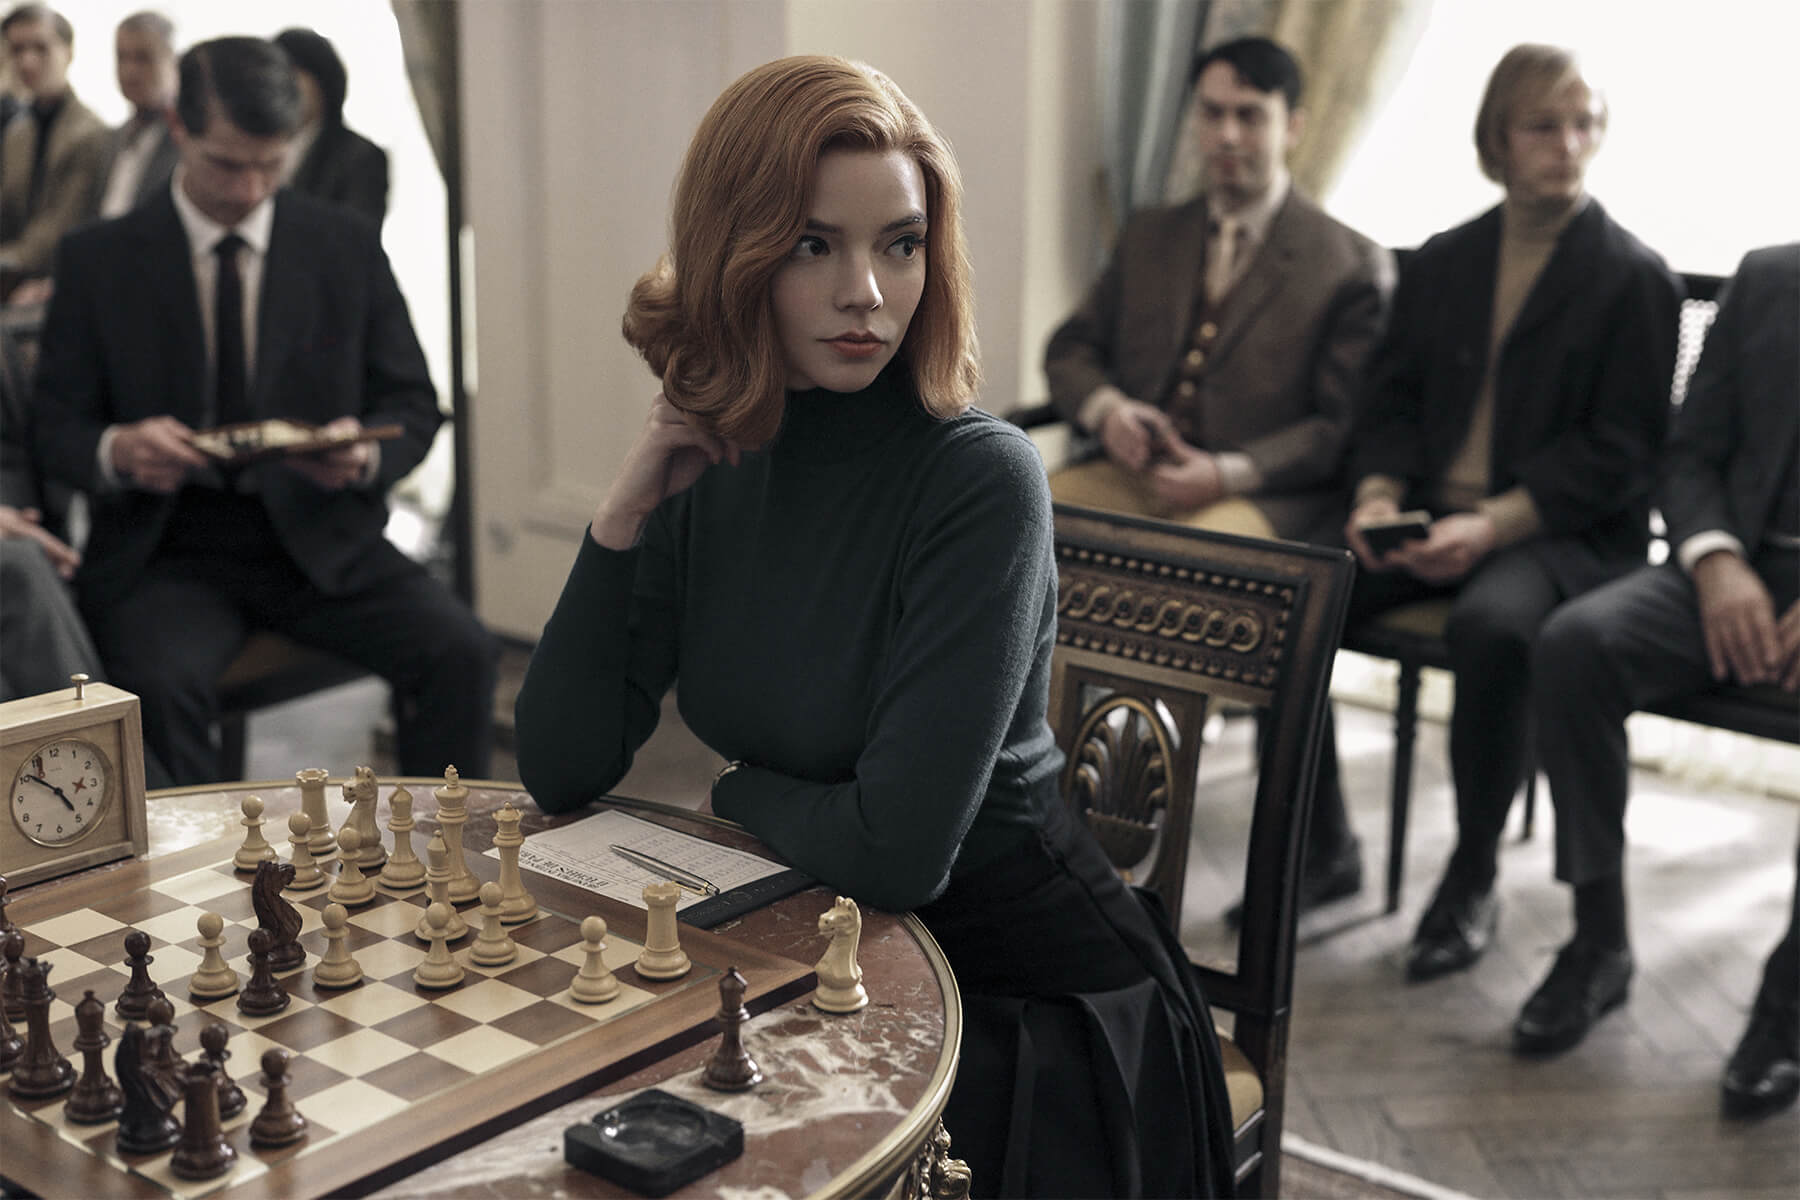 Anya Taylor-Joy as Beth Harmon in the Netflix series, The Queen's Gambit. Here Beth is seen looking pensive as a chess board, in the midst of a room of onlookers.